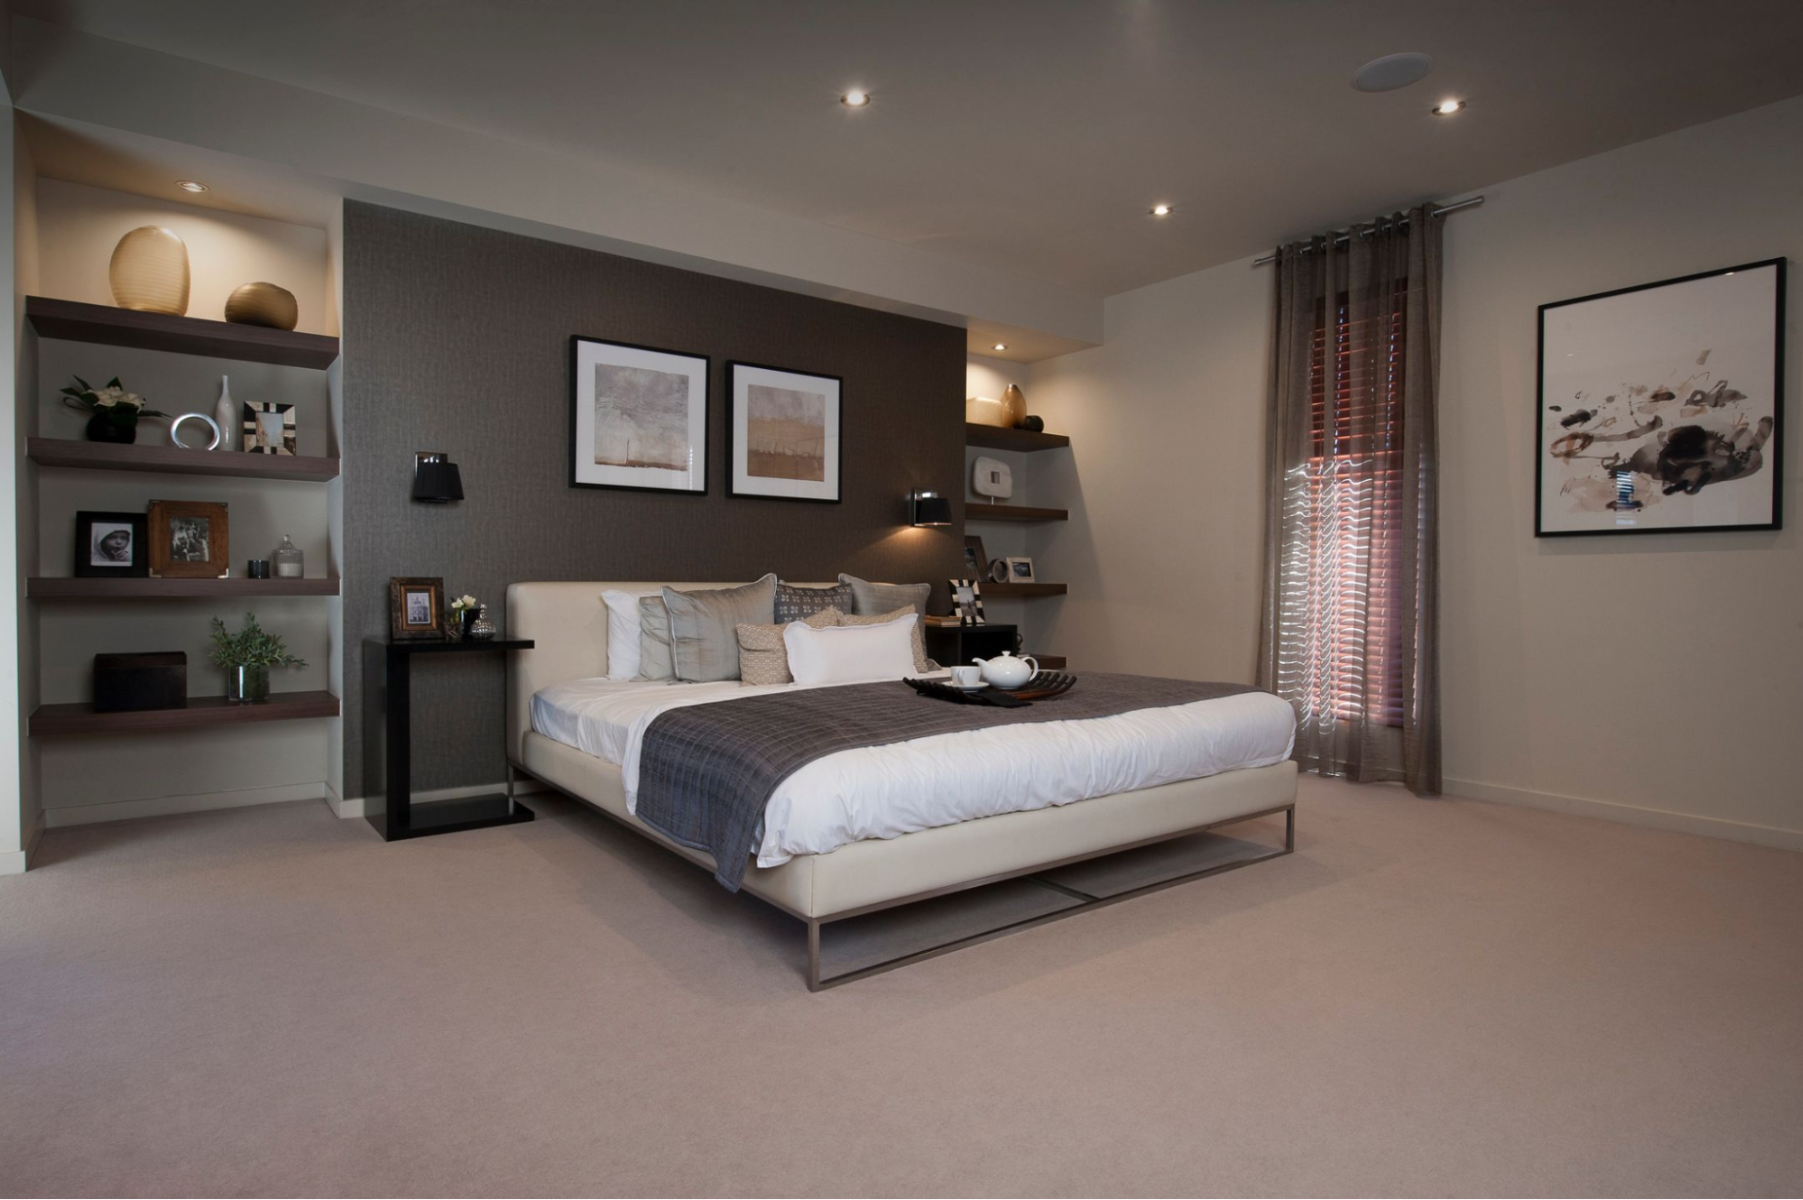 Bedroom with a double bed, light grey carpet and wall-mounted lights